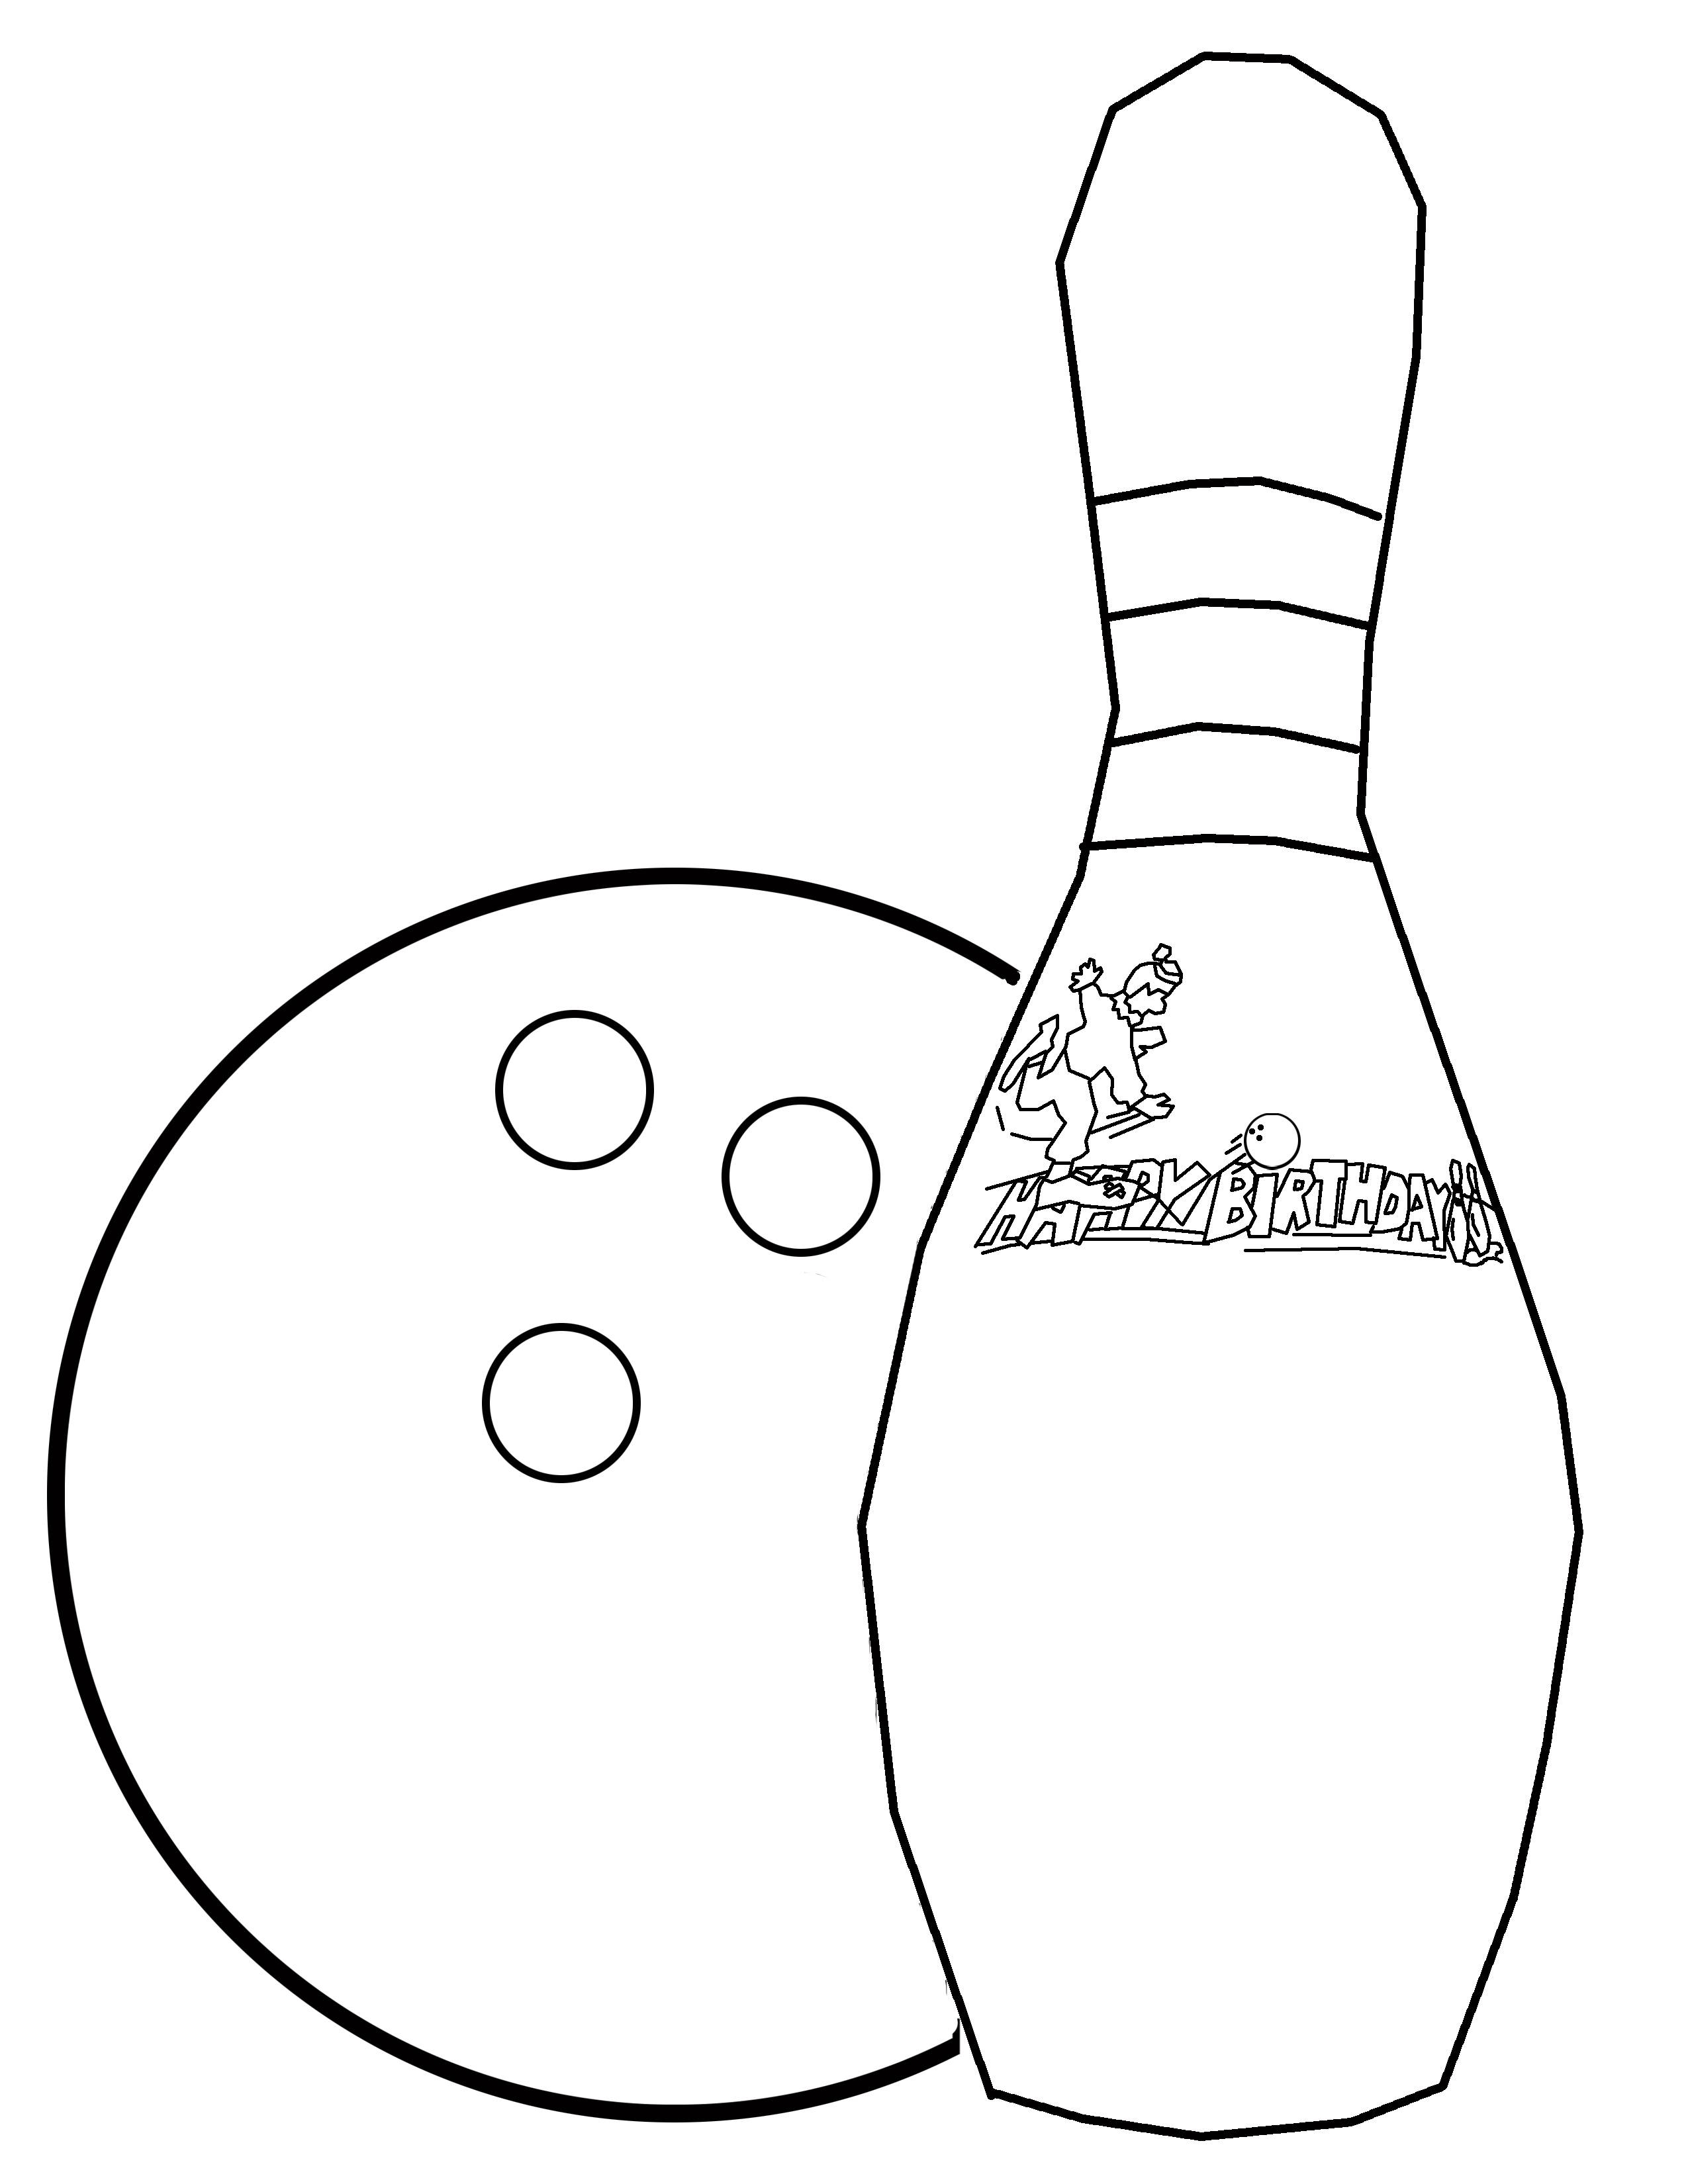 Free How To Draw A Bowling Pin, Download Free How To Draw A Bowling Pin